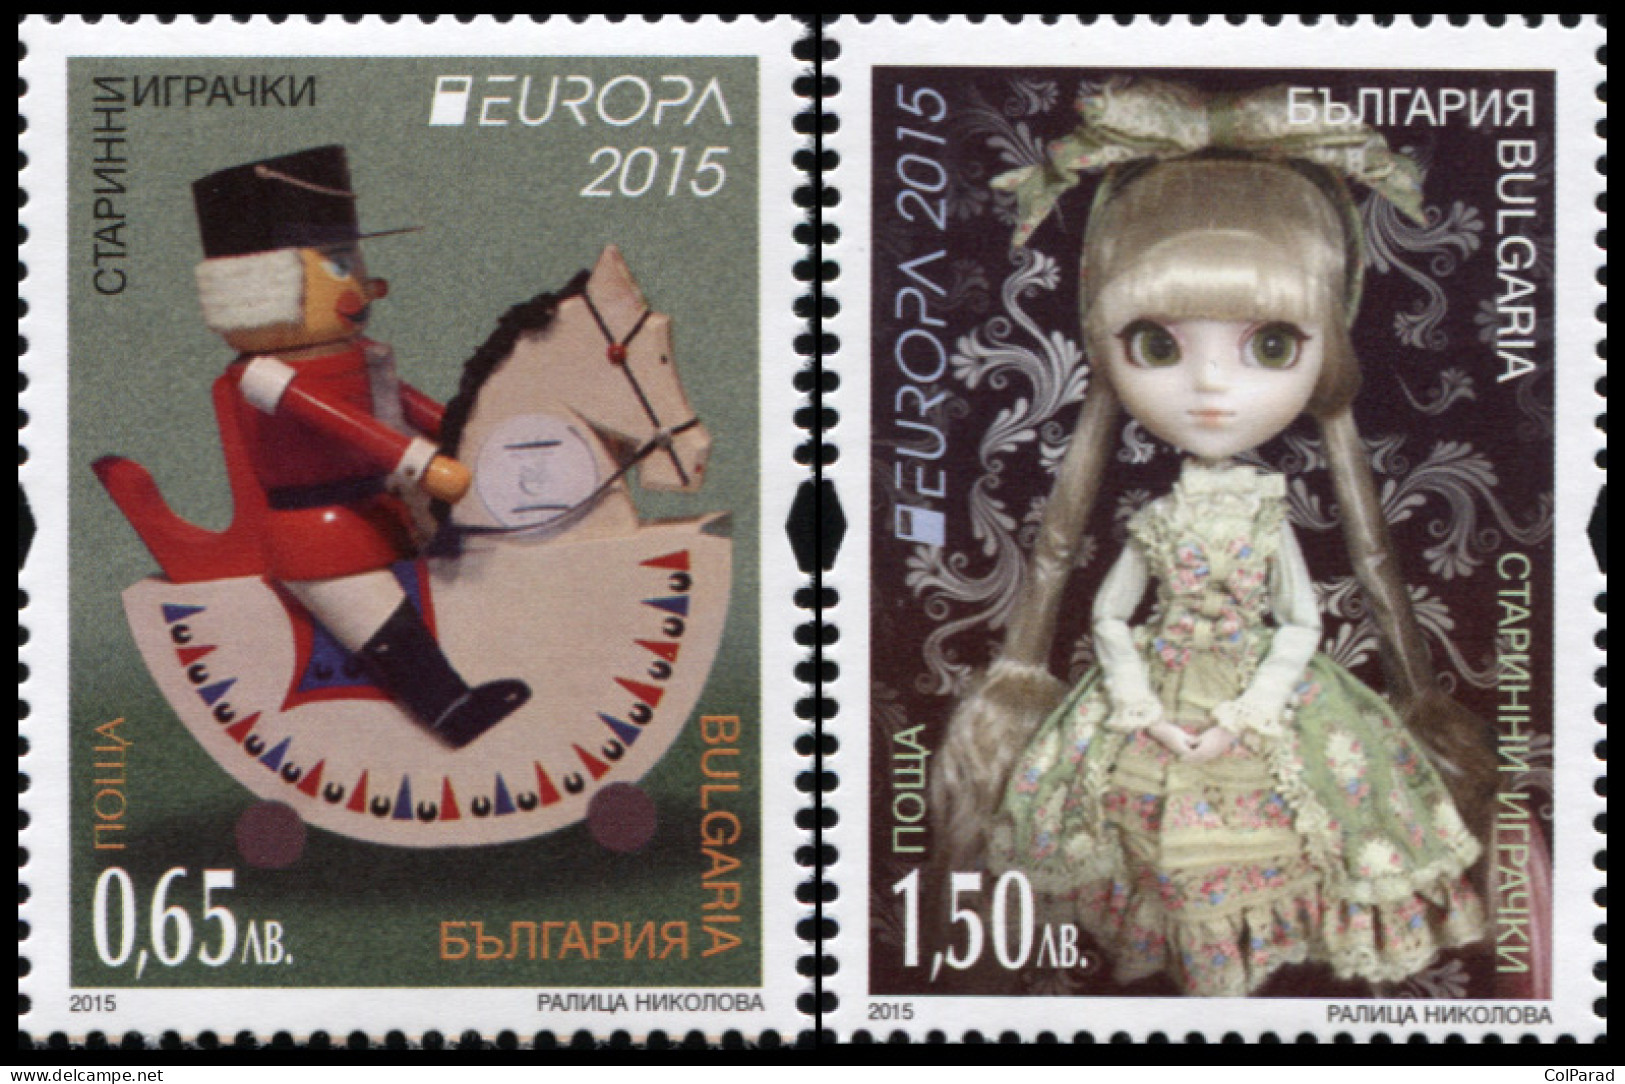 BULGARIA - 2015 - SET OF 2 STAMPS MNH ** - Old Toys - Unused Stamps